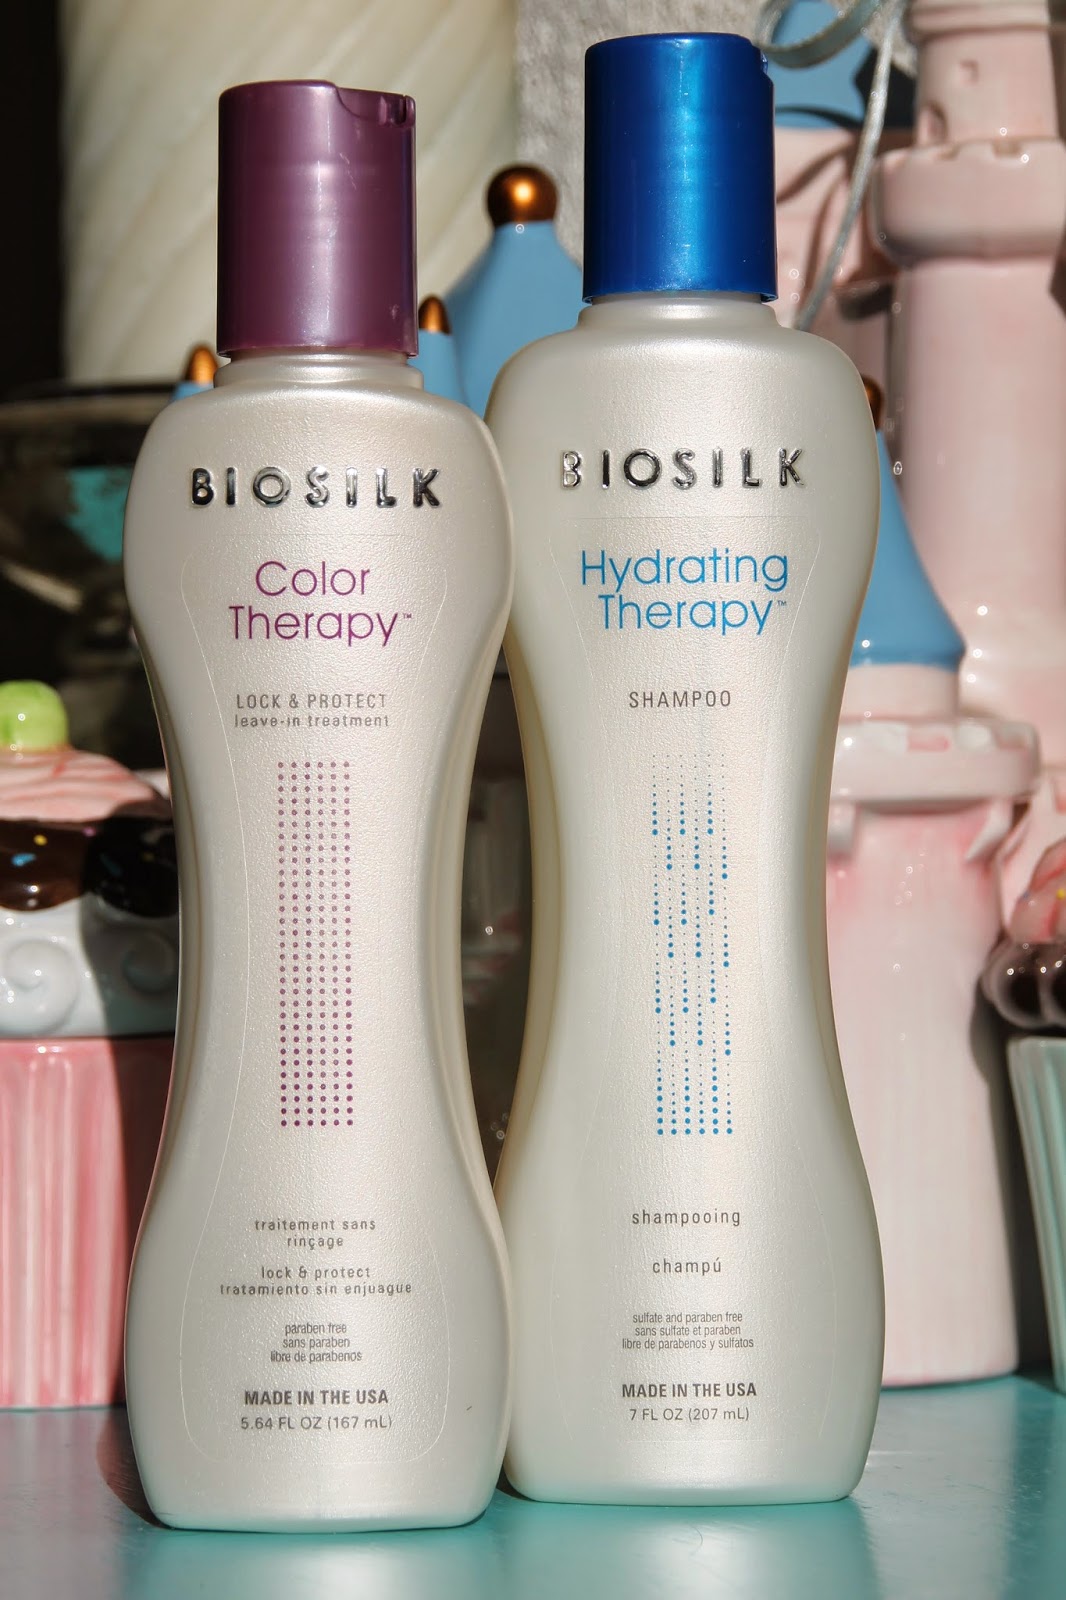 kleding relais kijk in Crystal's Reviews: Biosilk Color Therapy & Hydrating therapy